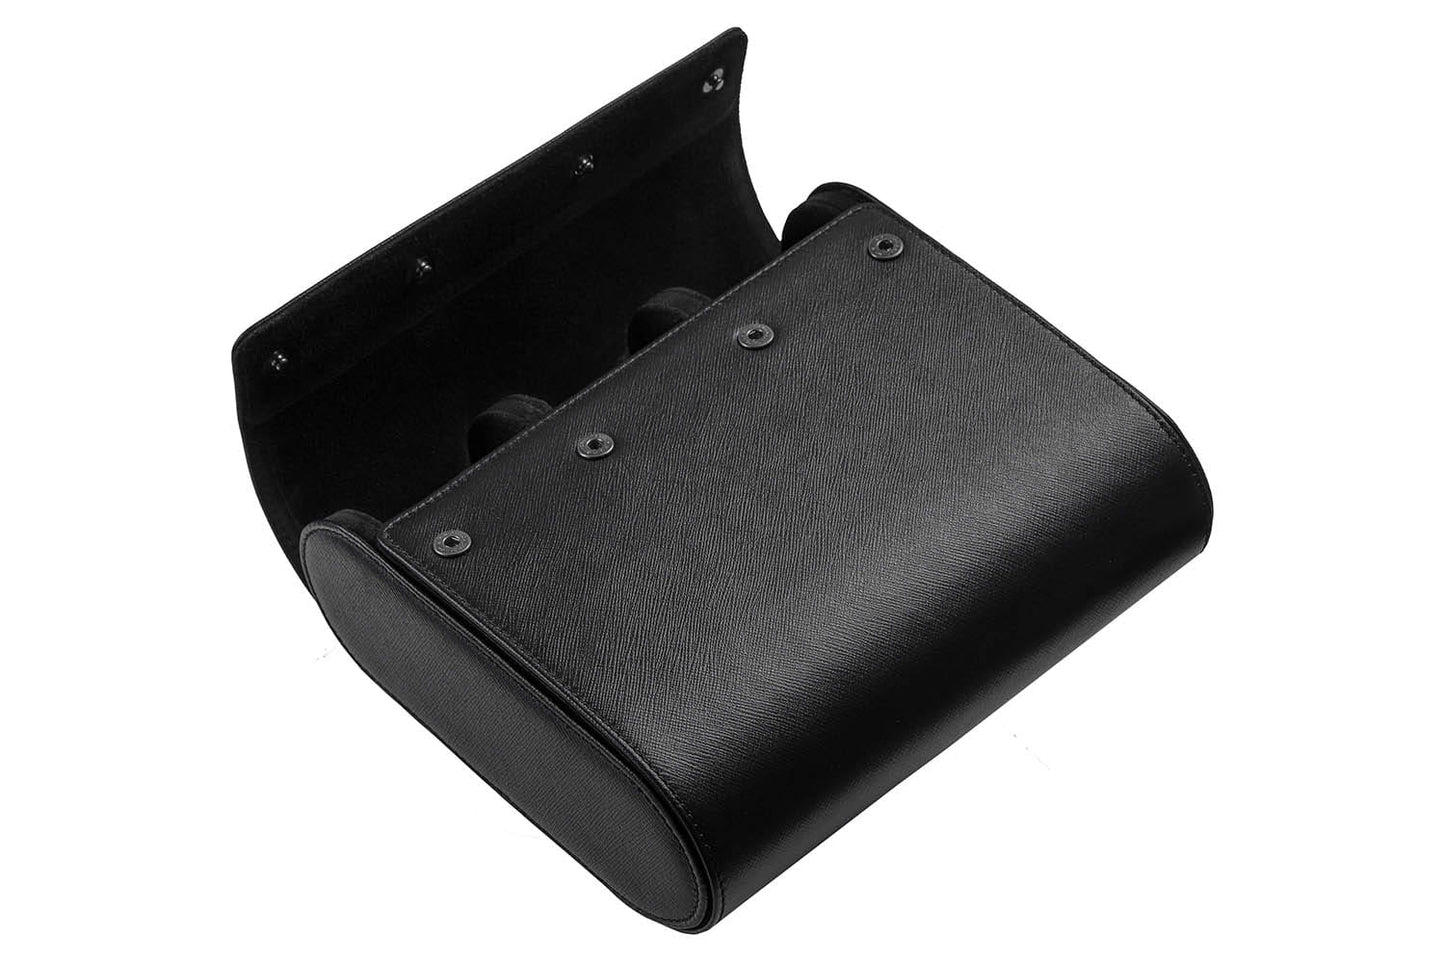 Leather Watch Case for 6 watches - Saffiano Black / Black